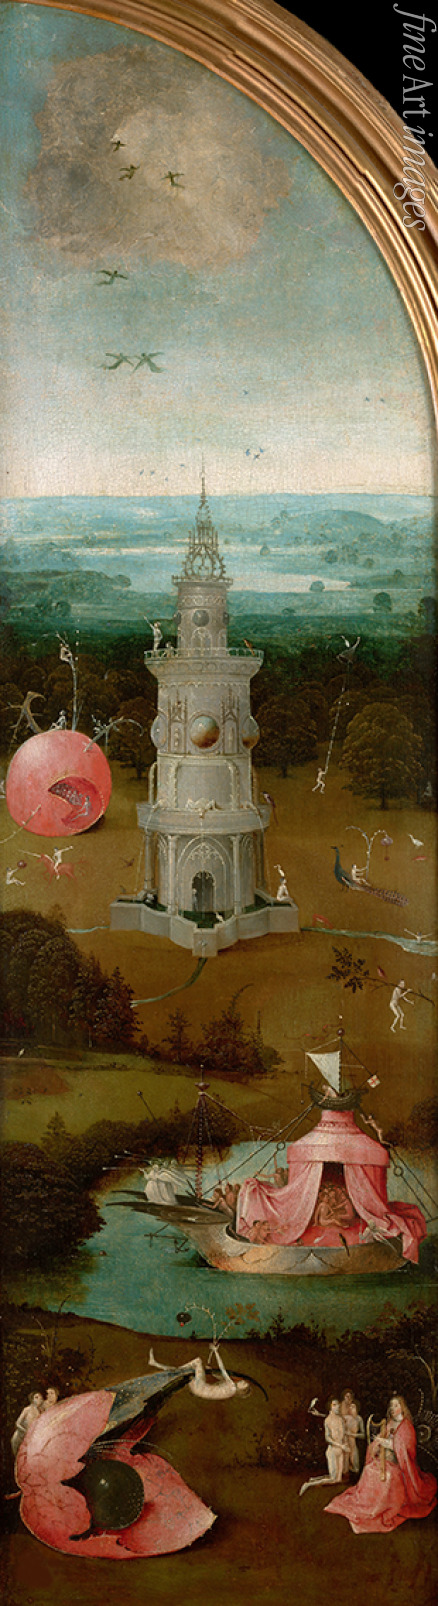 Bosch Hieronymus - The Last Judgment (Triptych, left panel)